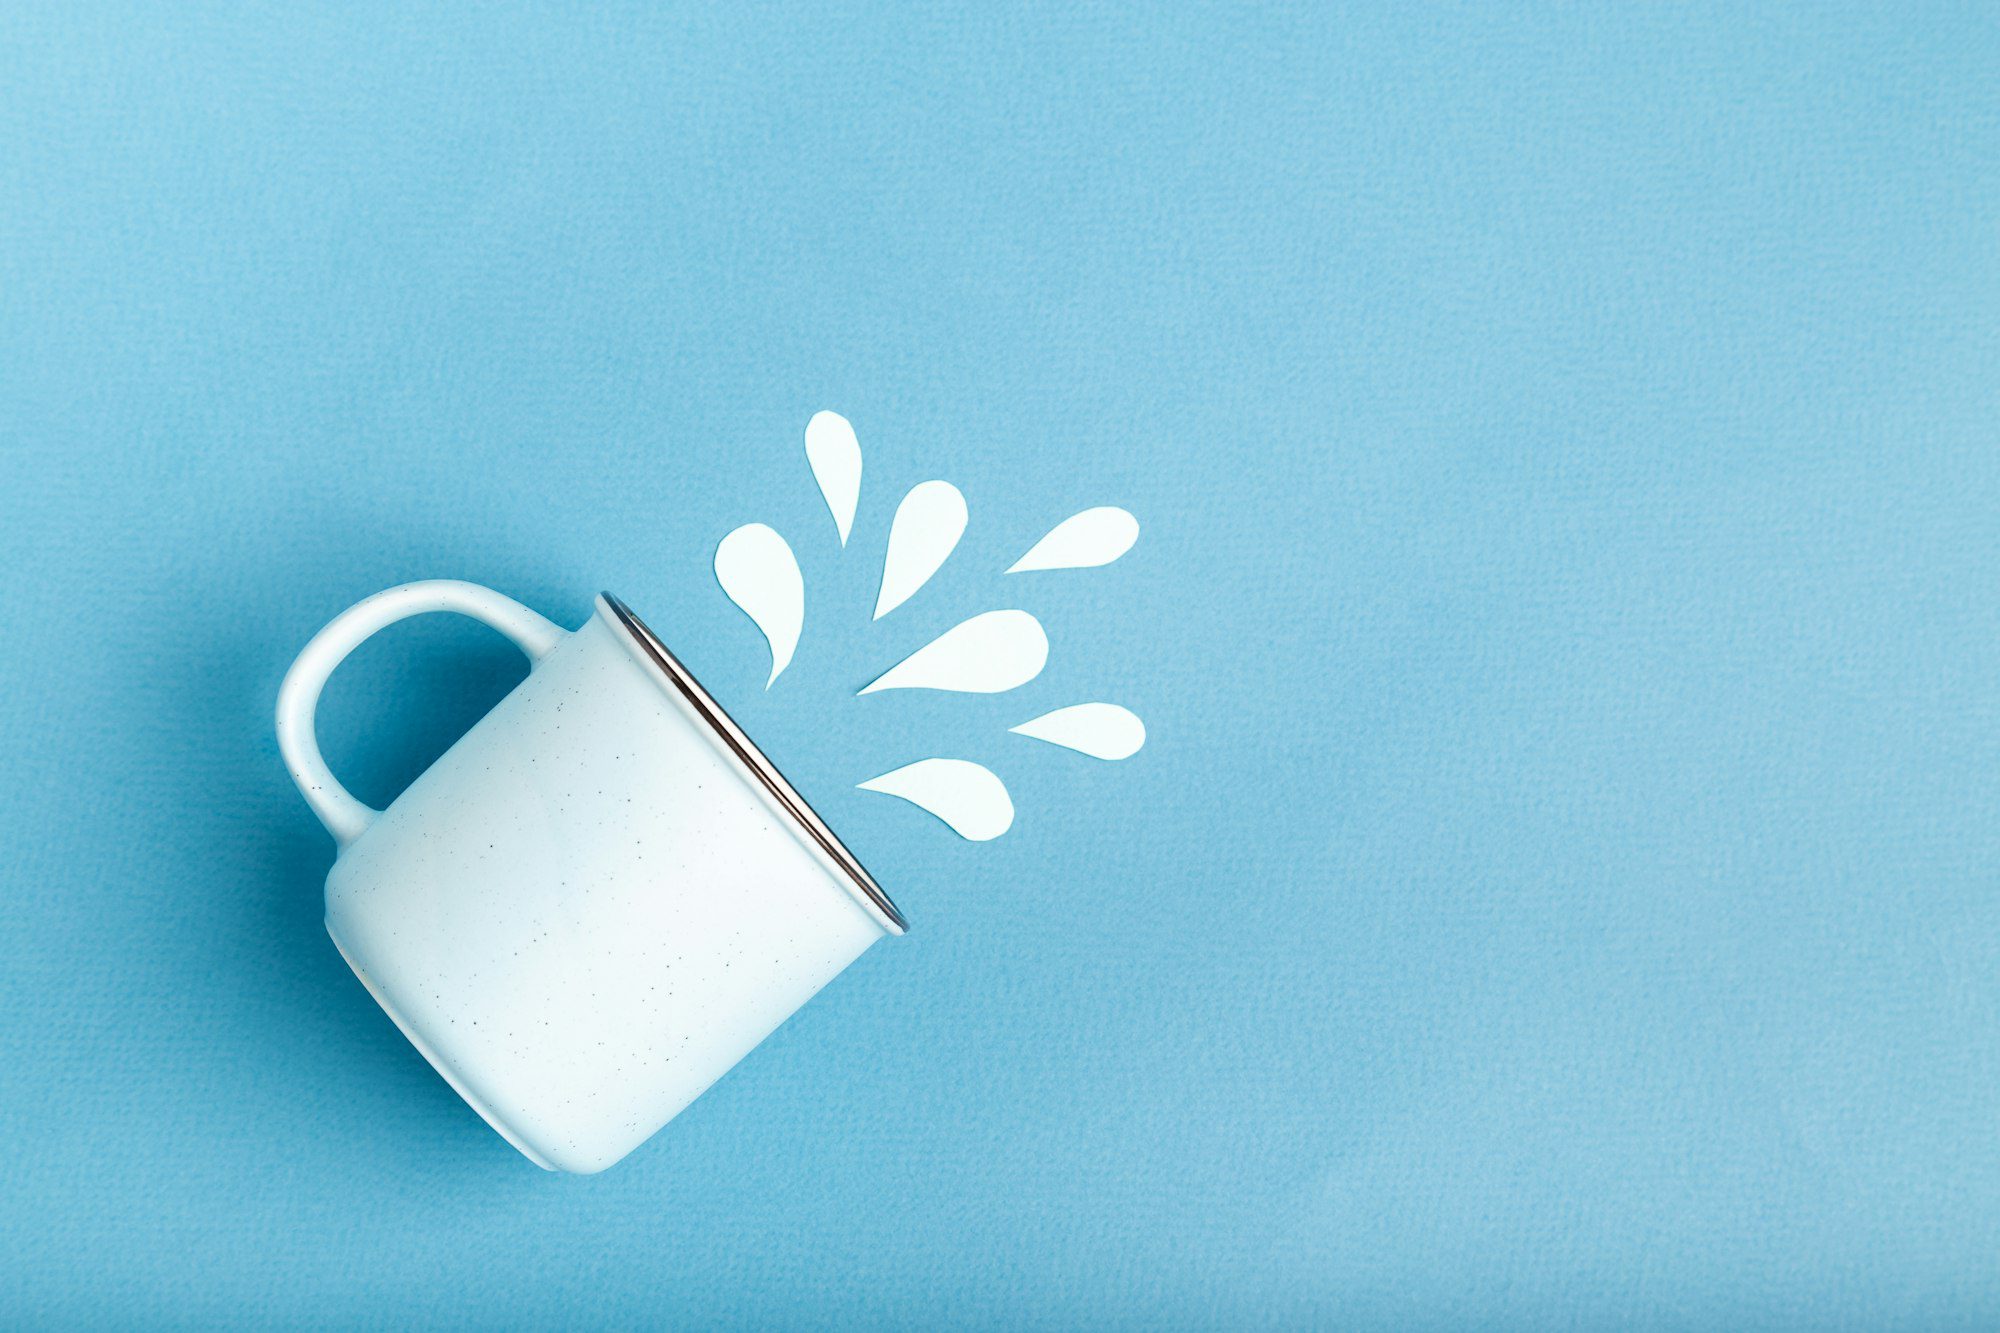 World water day concept with mug and paper cut water splashes